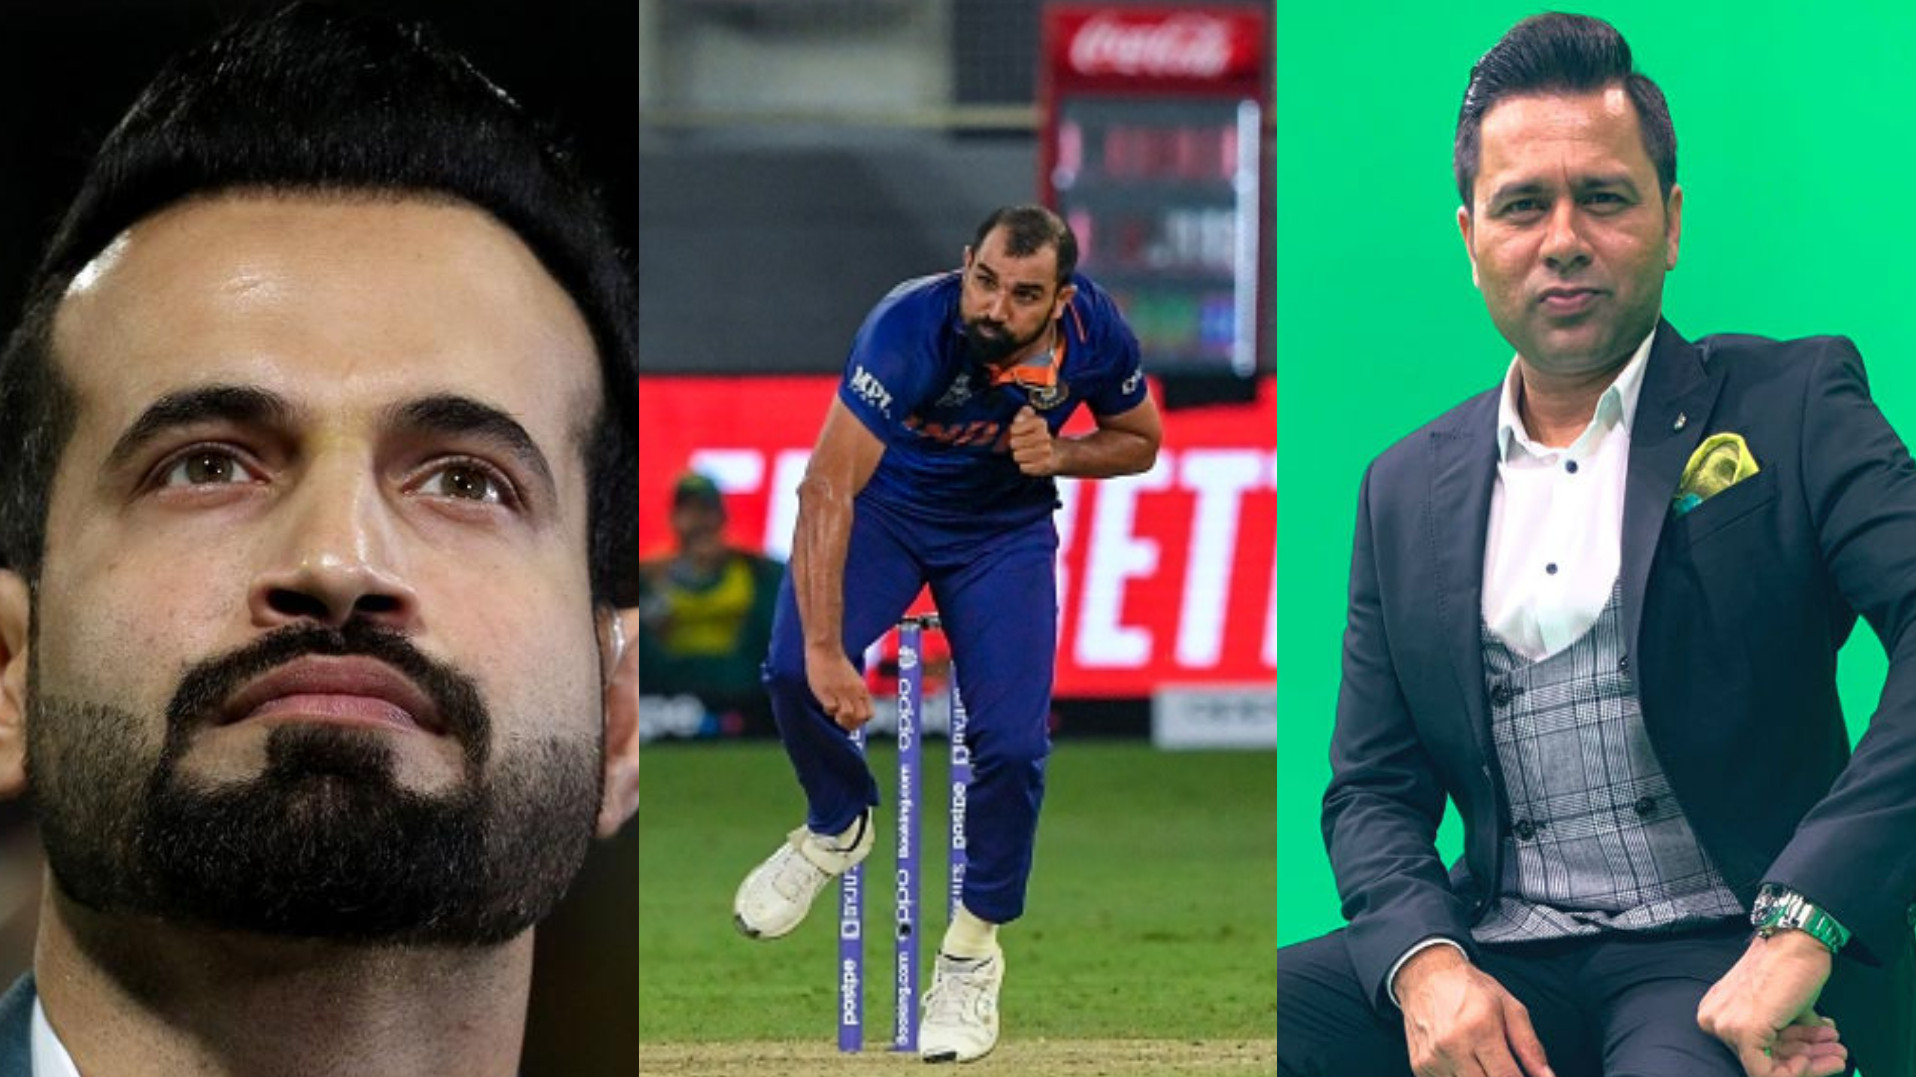 T20 World Cup 2021: Irfan Pathan and Aakash Chopra slam online abusers for targeting Mohammad Shami